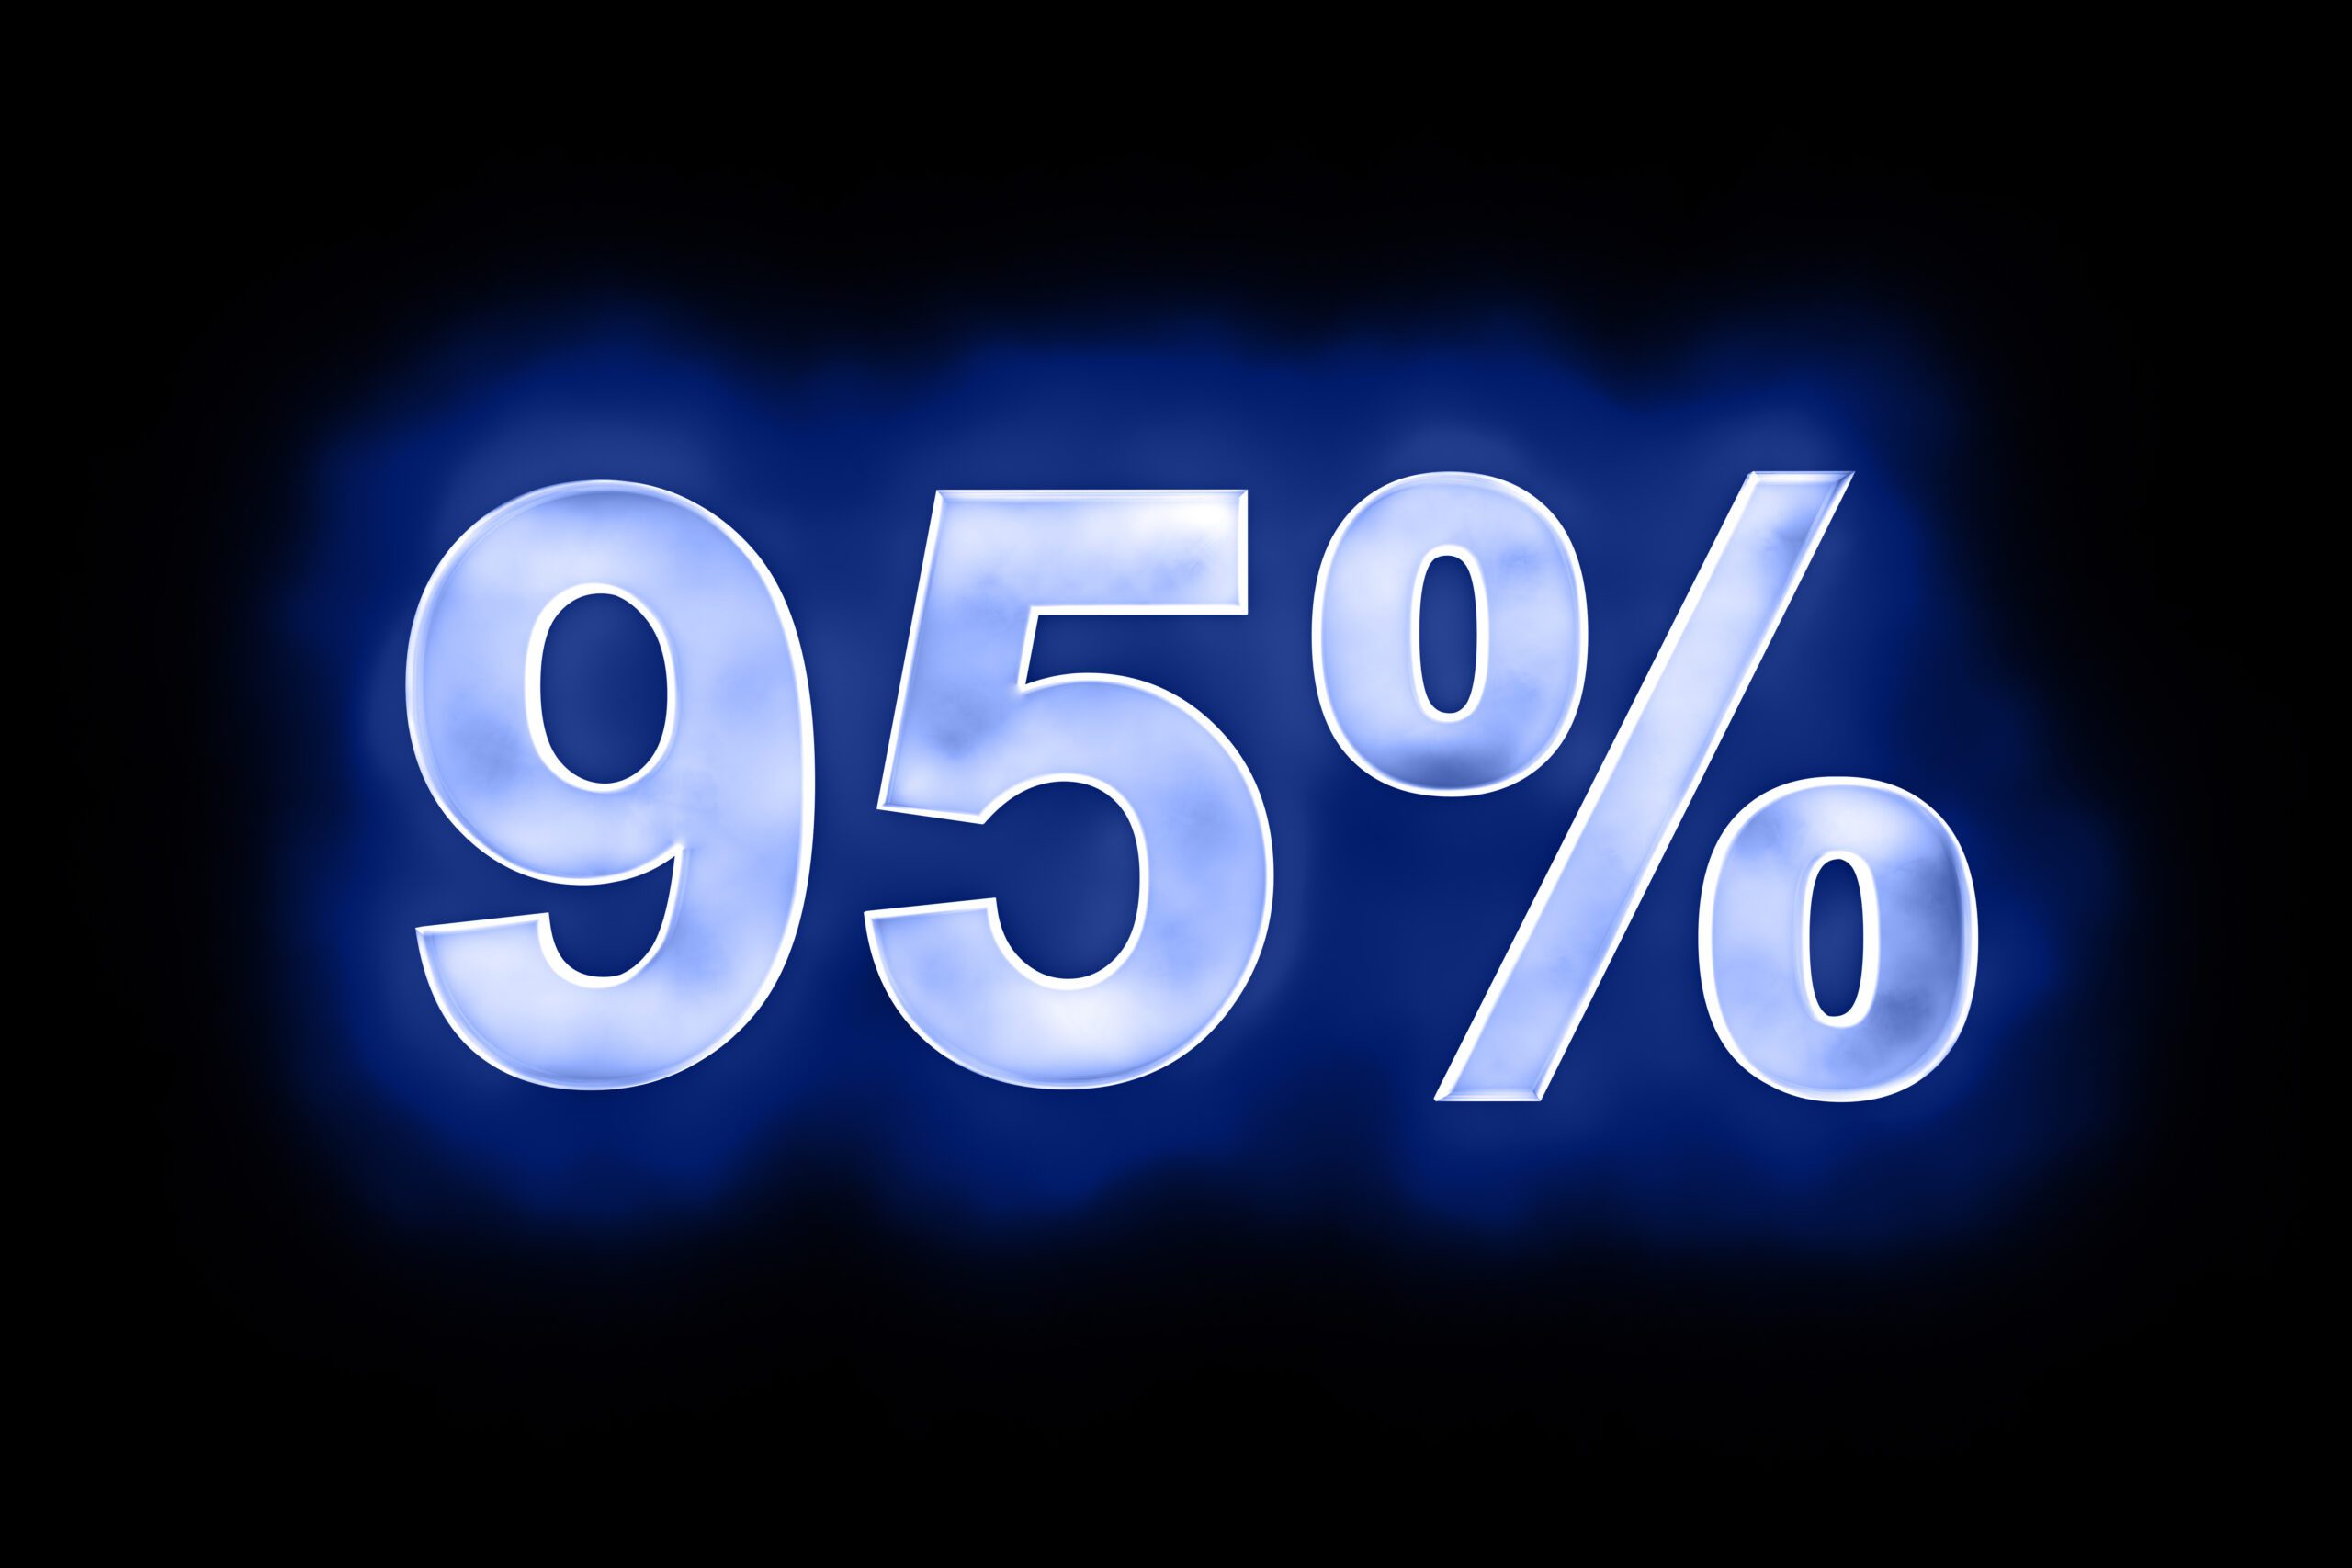 3d illustration of 95 percent in glowing mottled white numerals on a blue background with a black surround